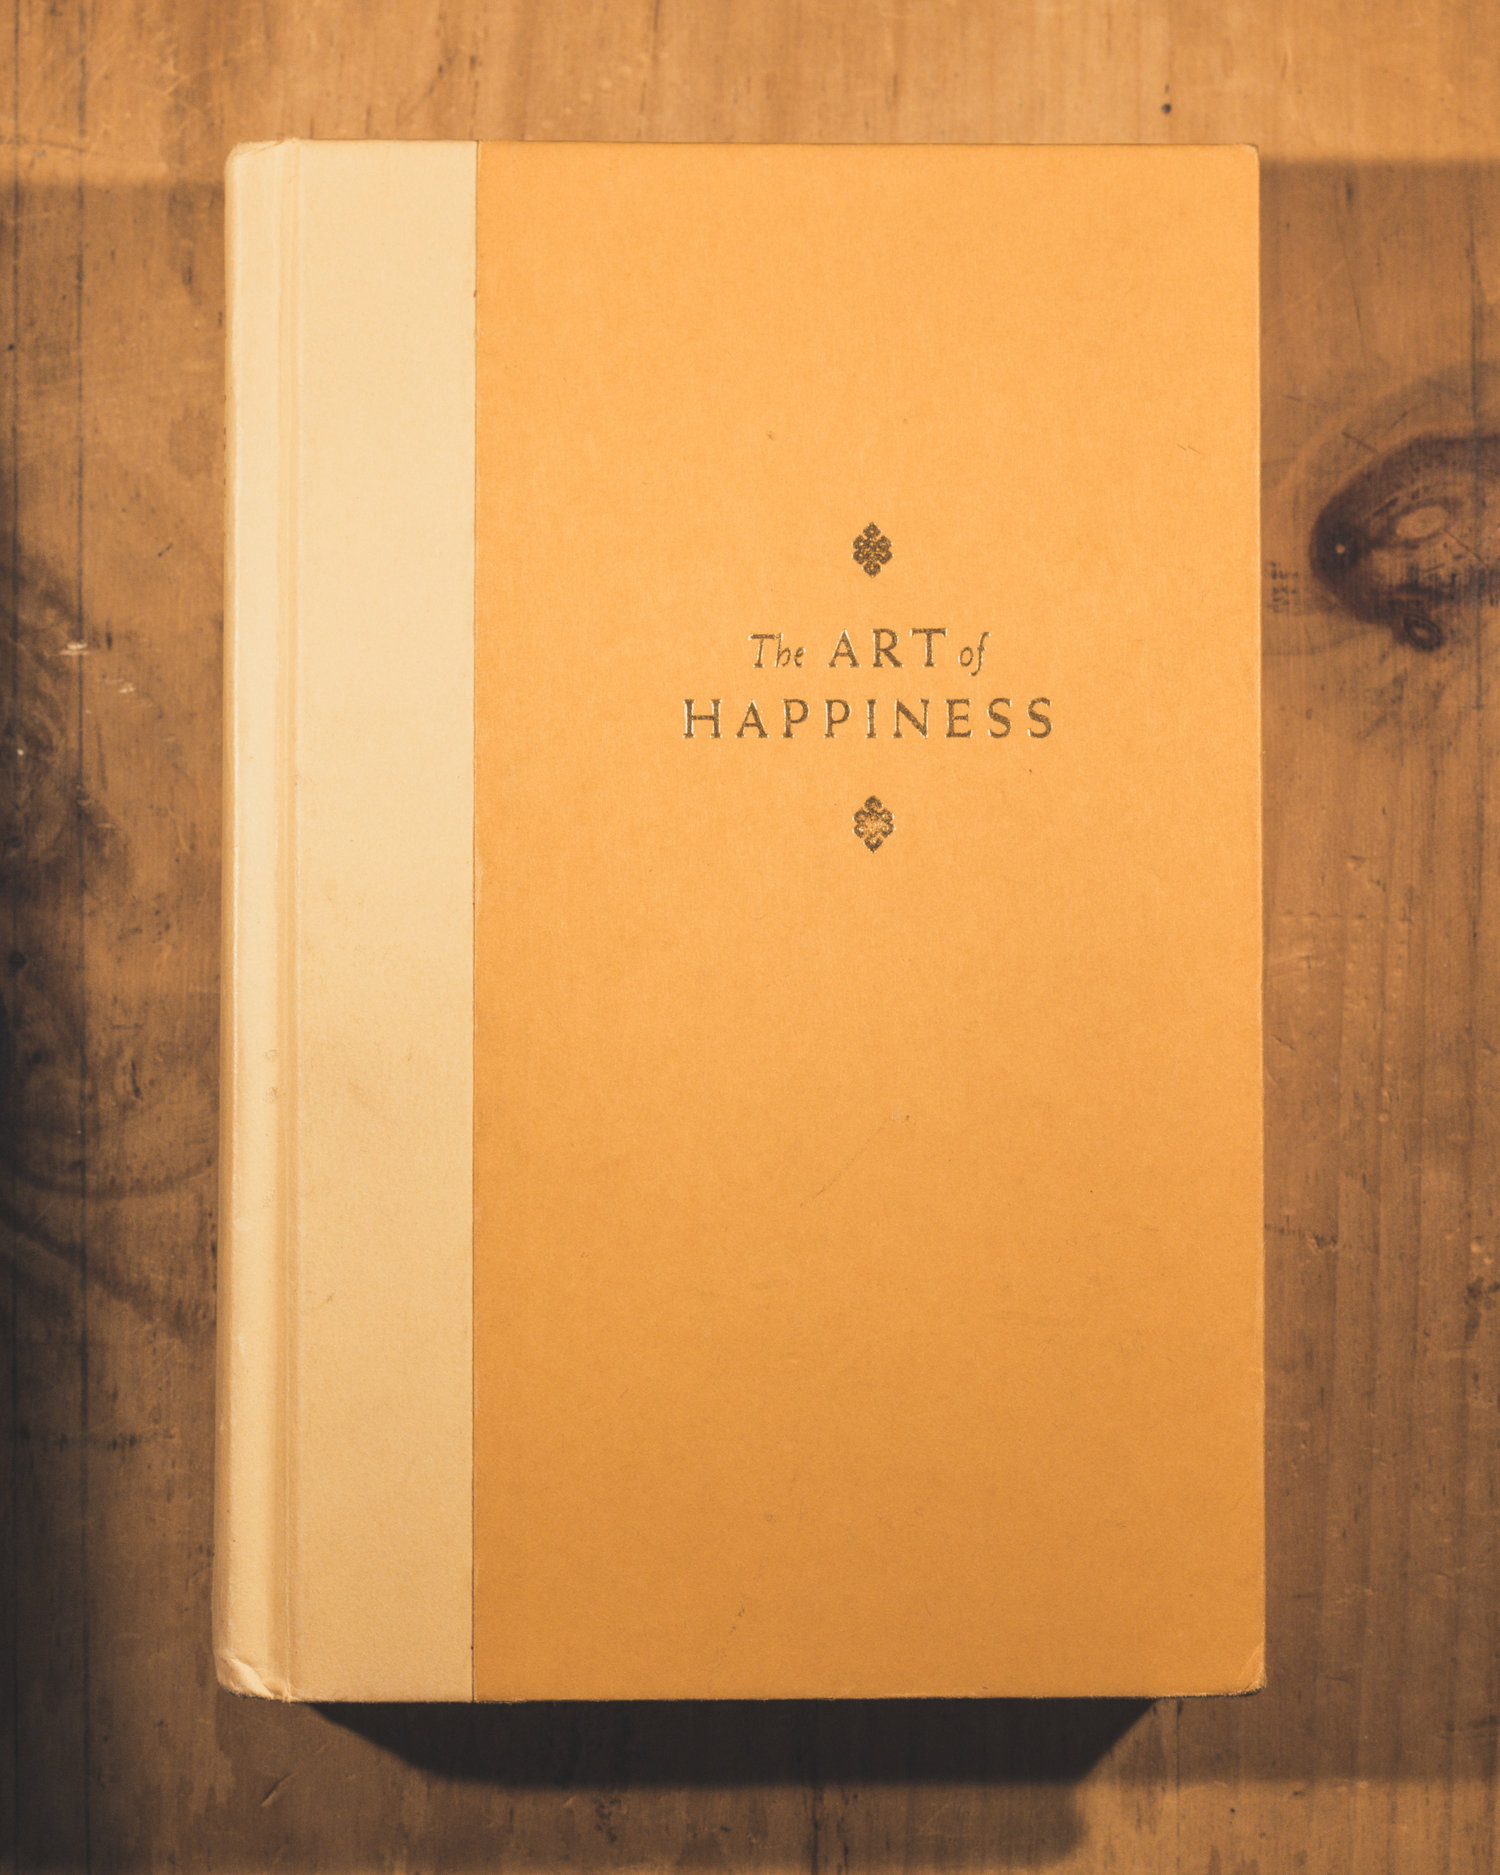 The Art of Happiness by His Holiness the Dalai Lama and Howard C. Cutler